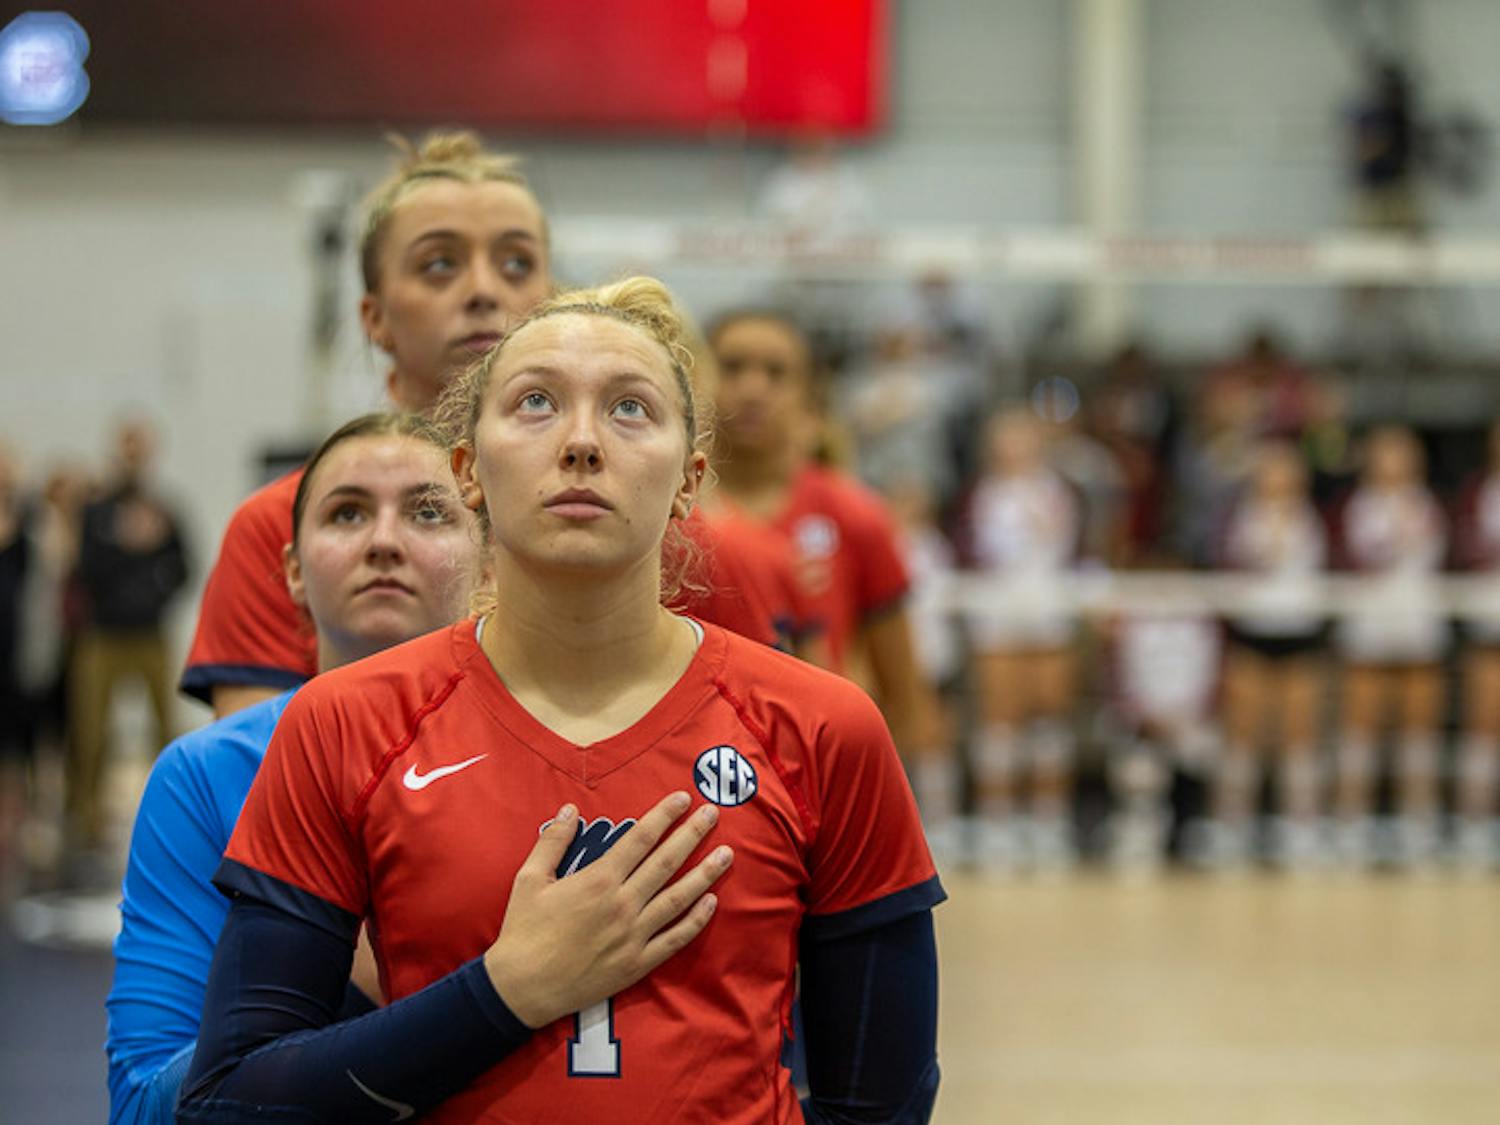 Ole Miss sophomore libero Bailee Middleton puts her hand on her heart during the national anthem at the start of the South Carolina and Ole Miss matchup on Nov. 5, 2022. Ole Miss beat South Carolina 3-1 in the first game of the two-game series.